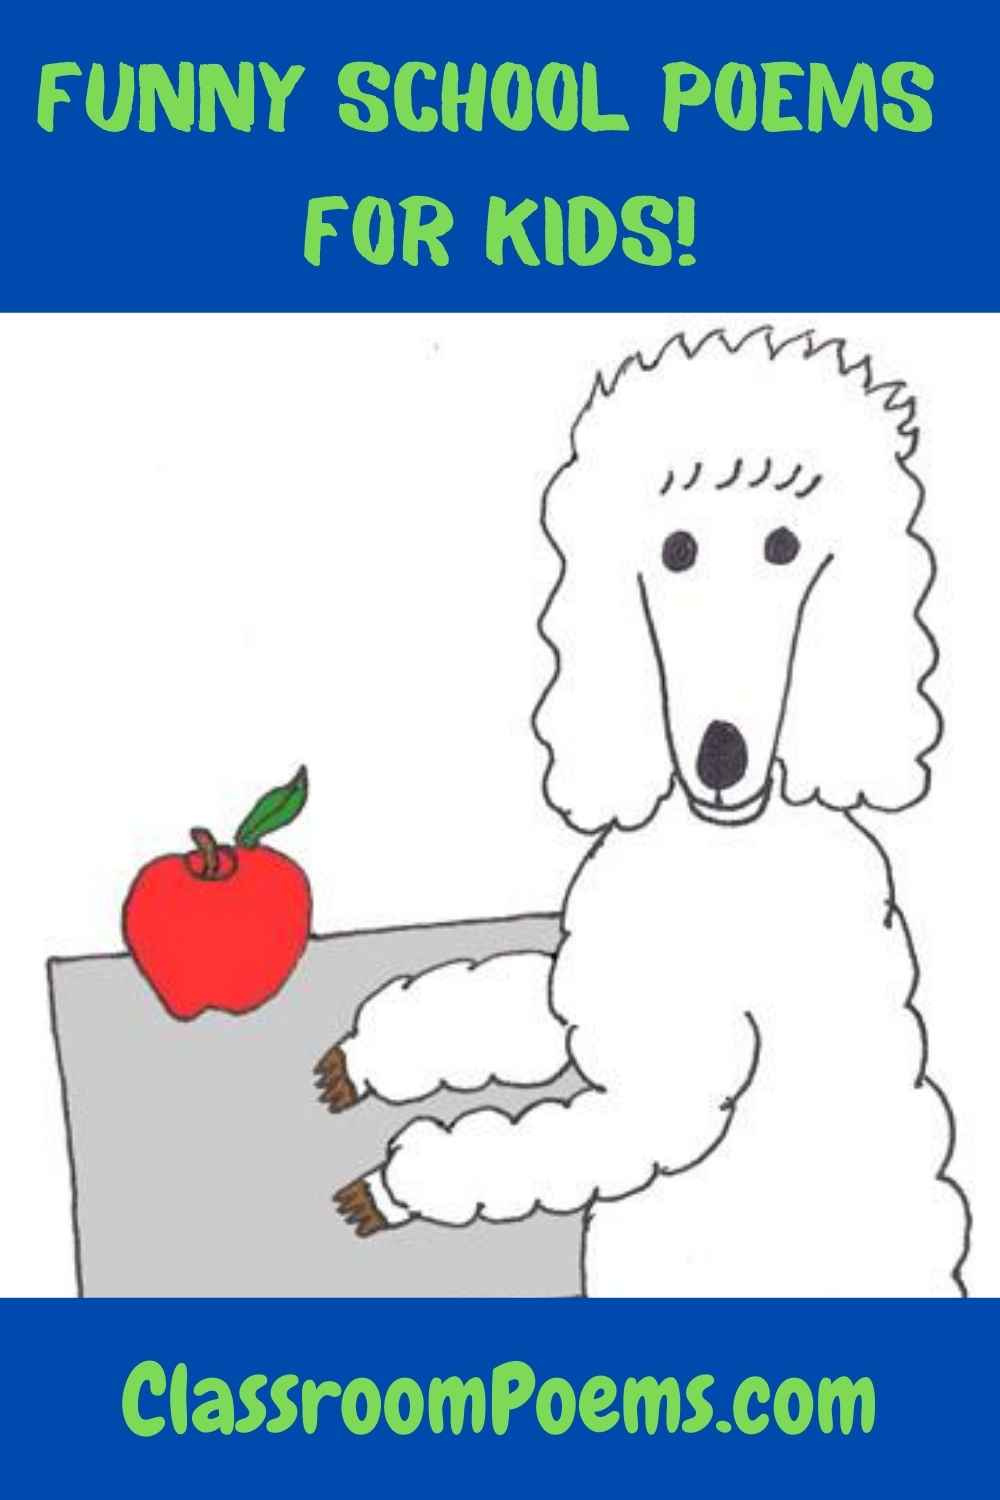 Funny school poems for kids by Denise Rodgers on ClassroomPoems.com.